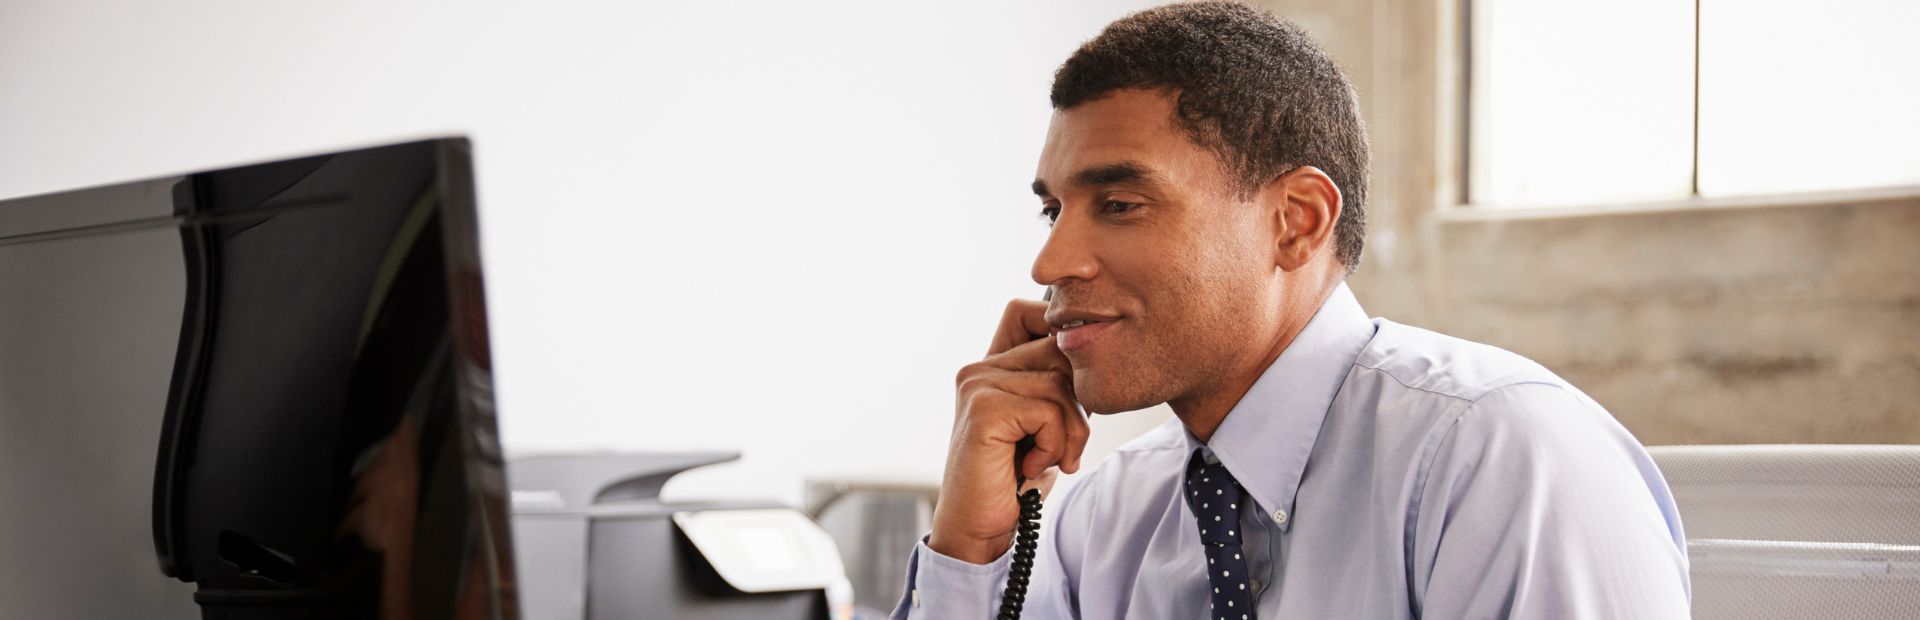 businessman making phone call using used phone system